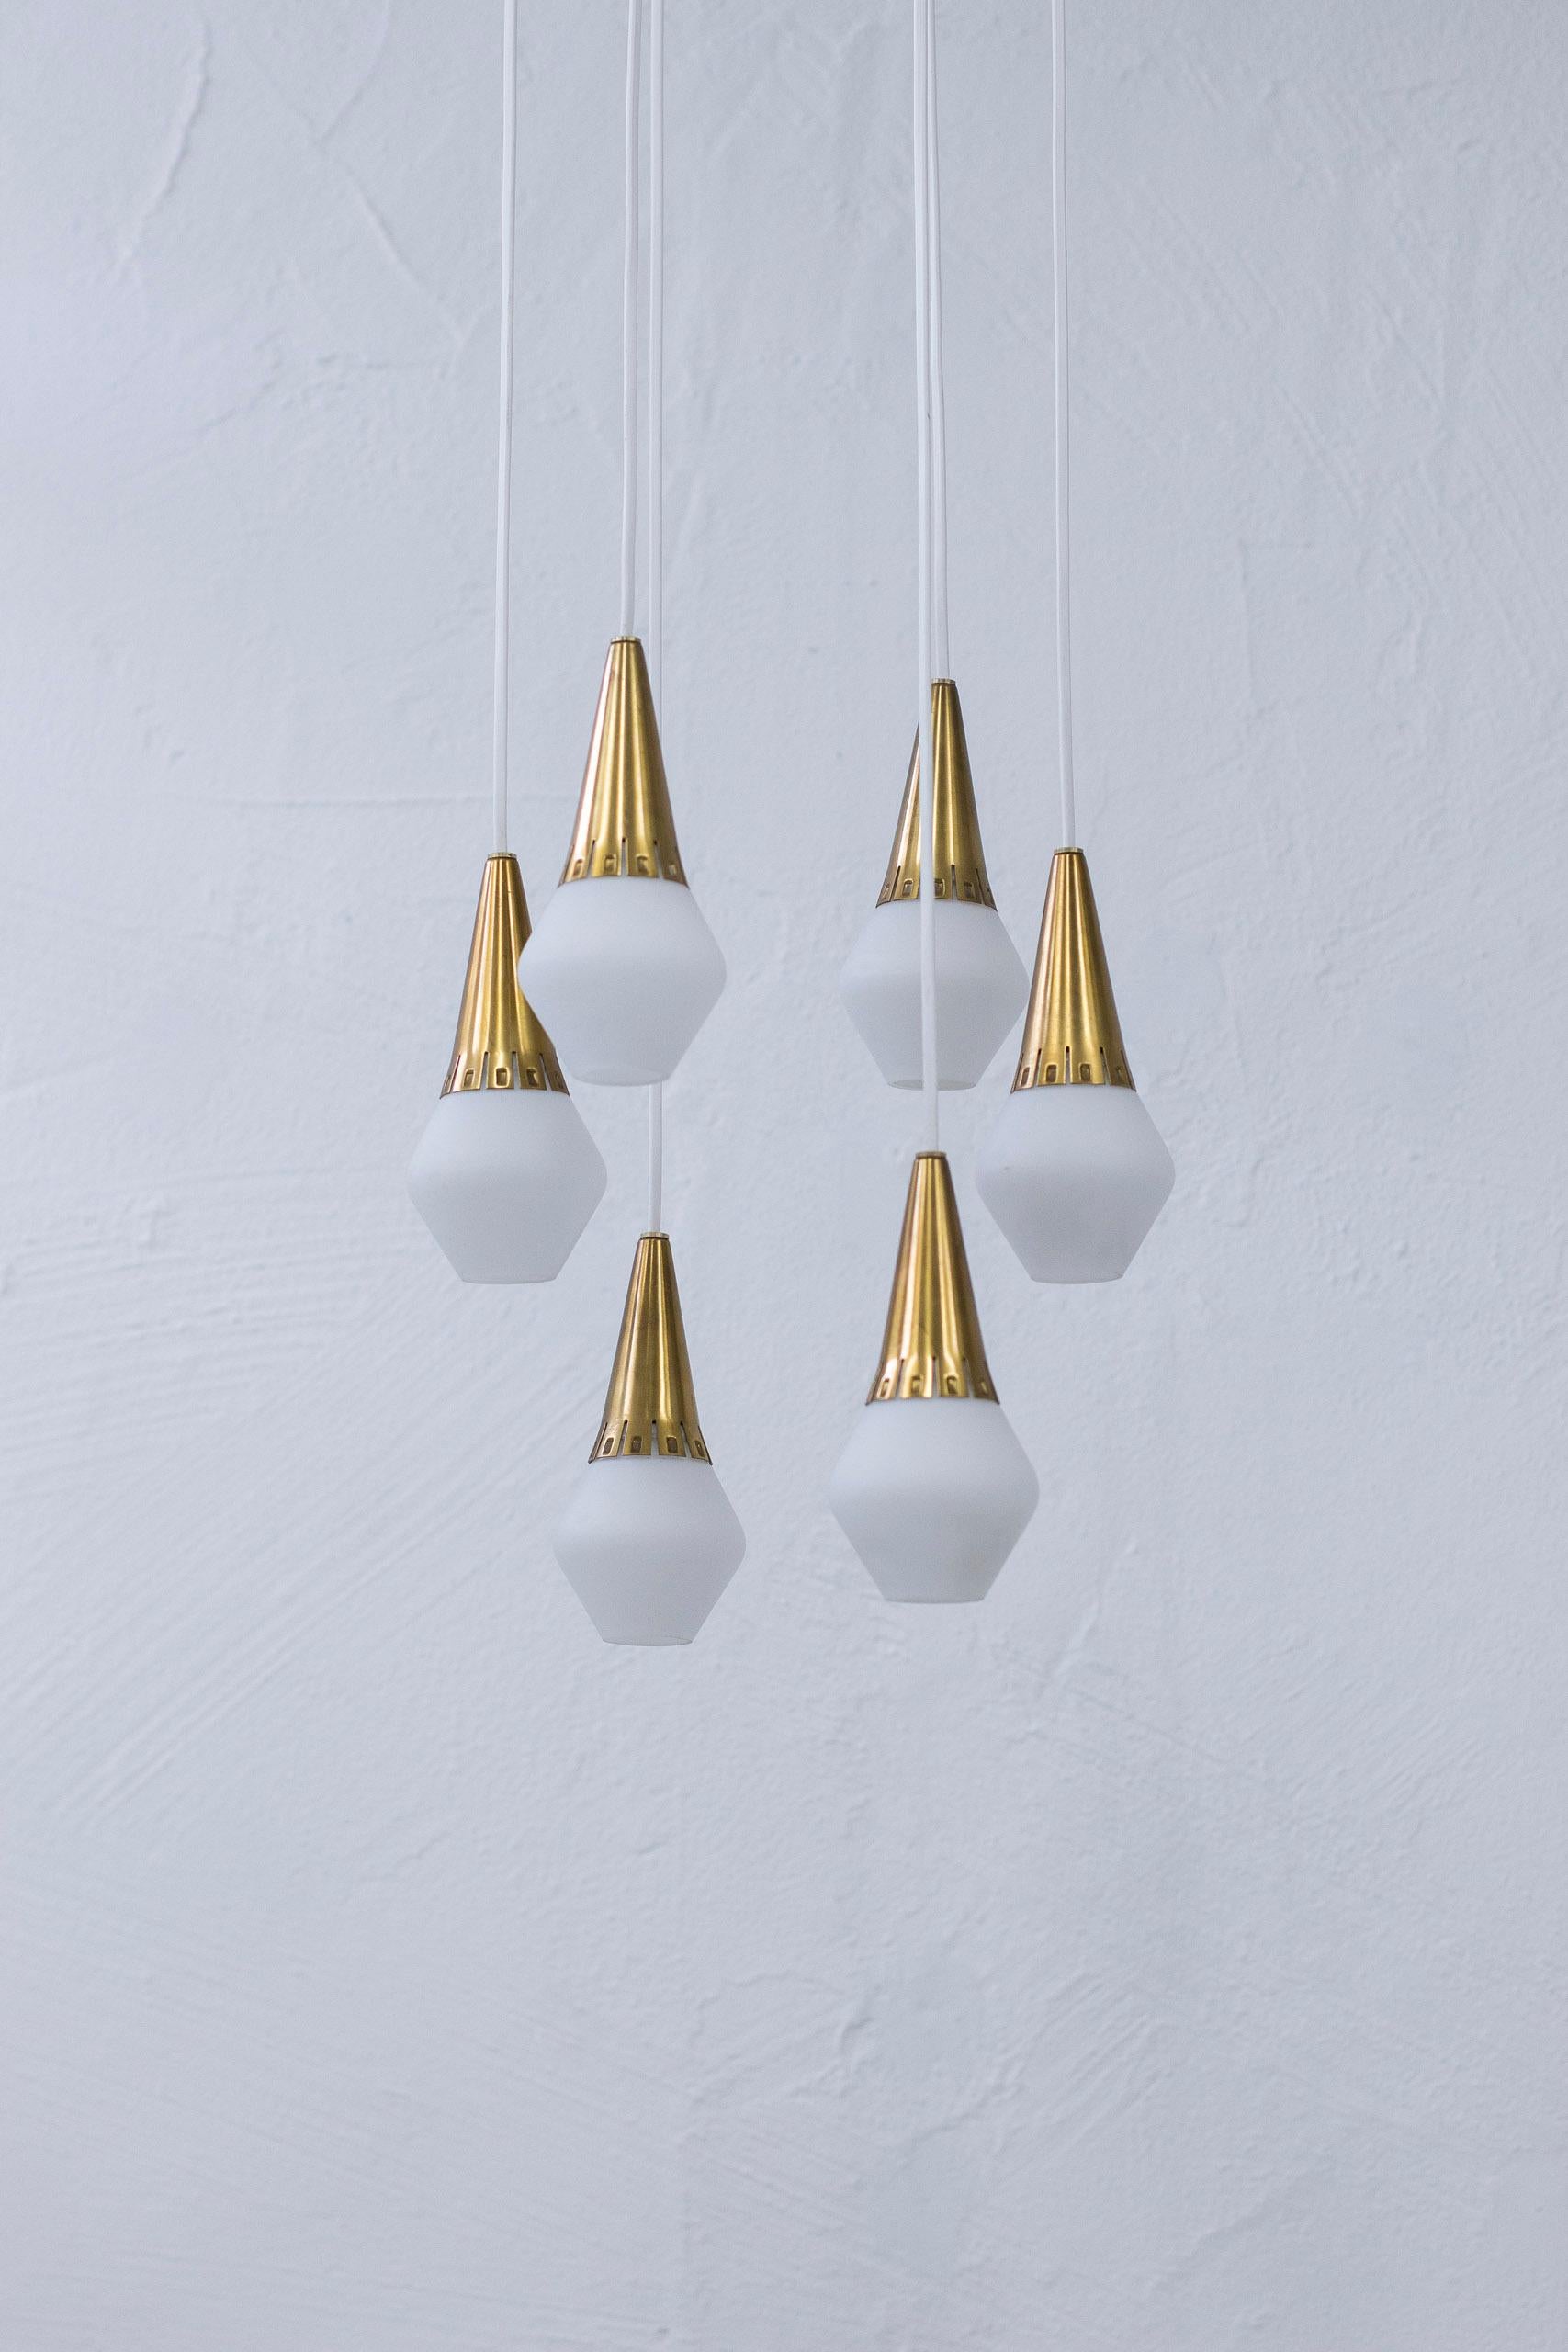 Swedish Ceiling Pendant in Brass and Opal Glass by Harald Notini for Böhlmarks, 1950s For Sale